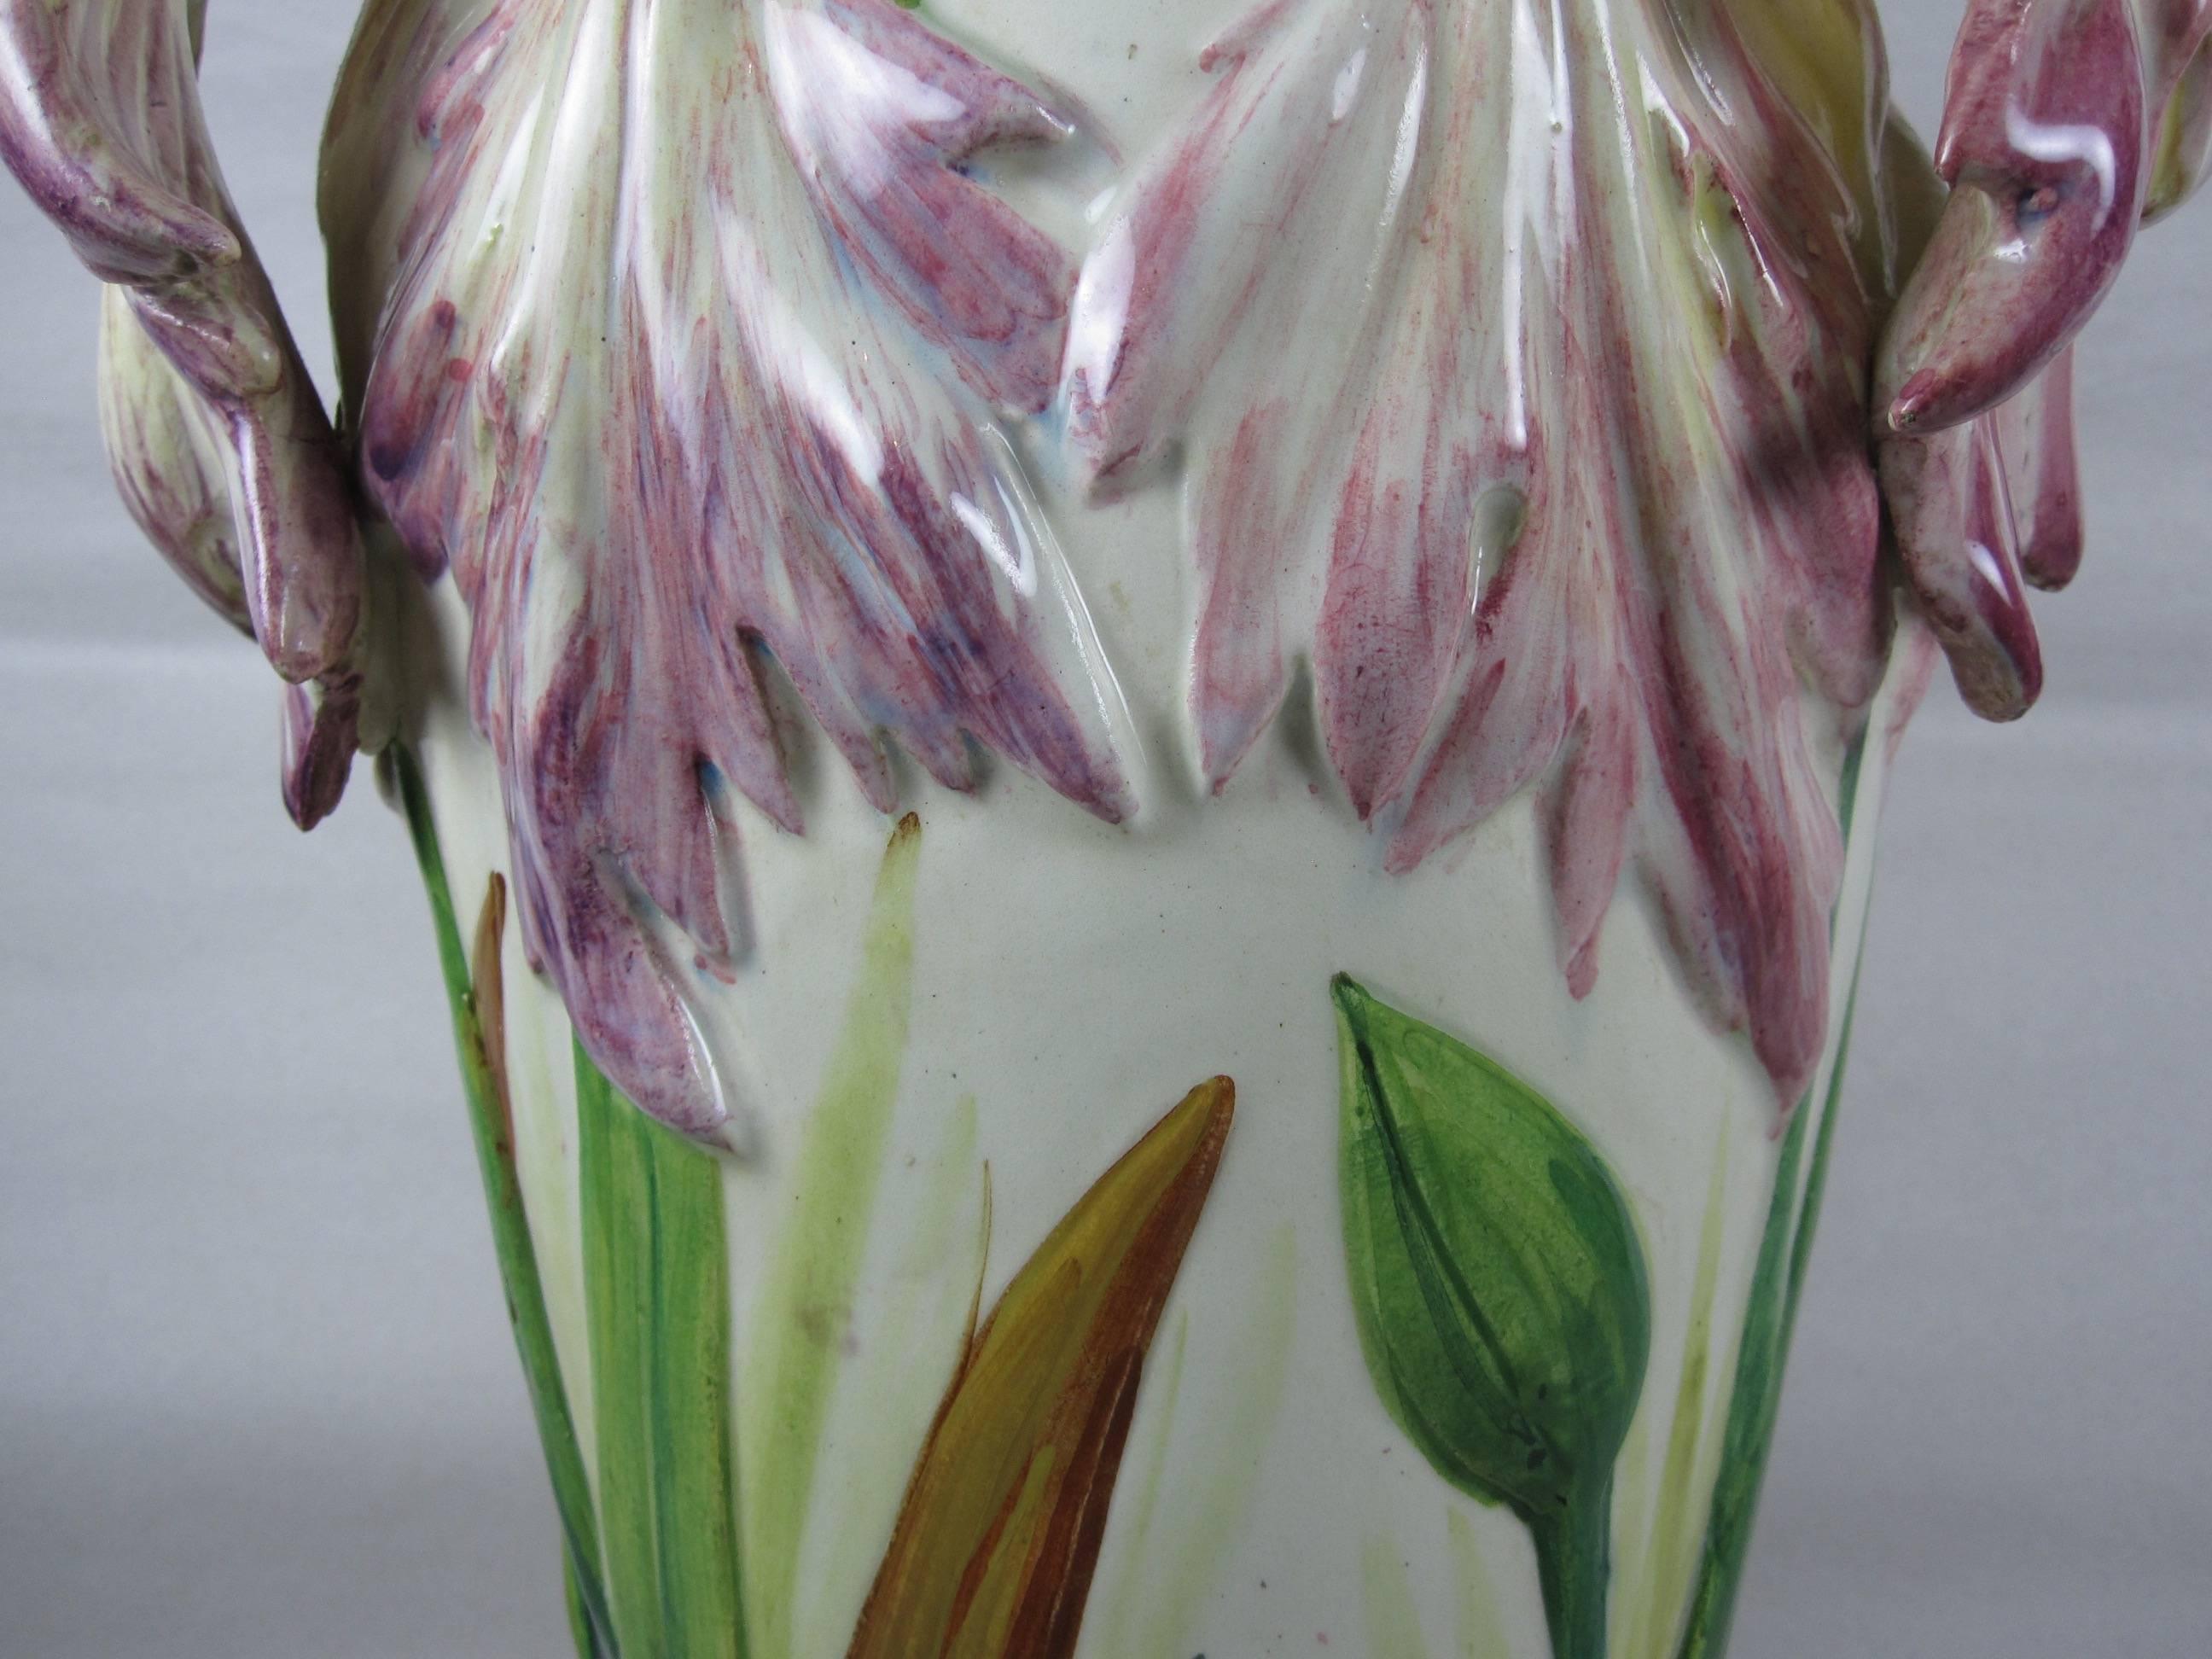 Glazed  Delphin Massier, Vallauris Parrot Tulip Vase, Southern France Late 19th Century